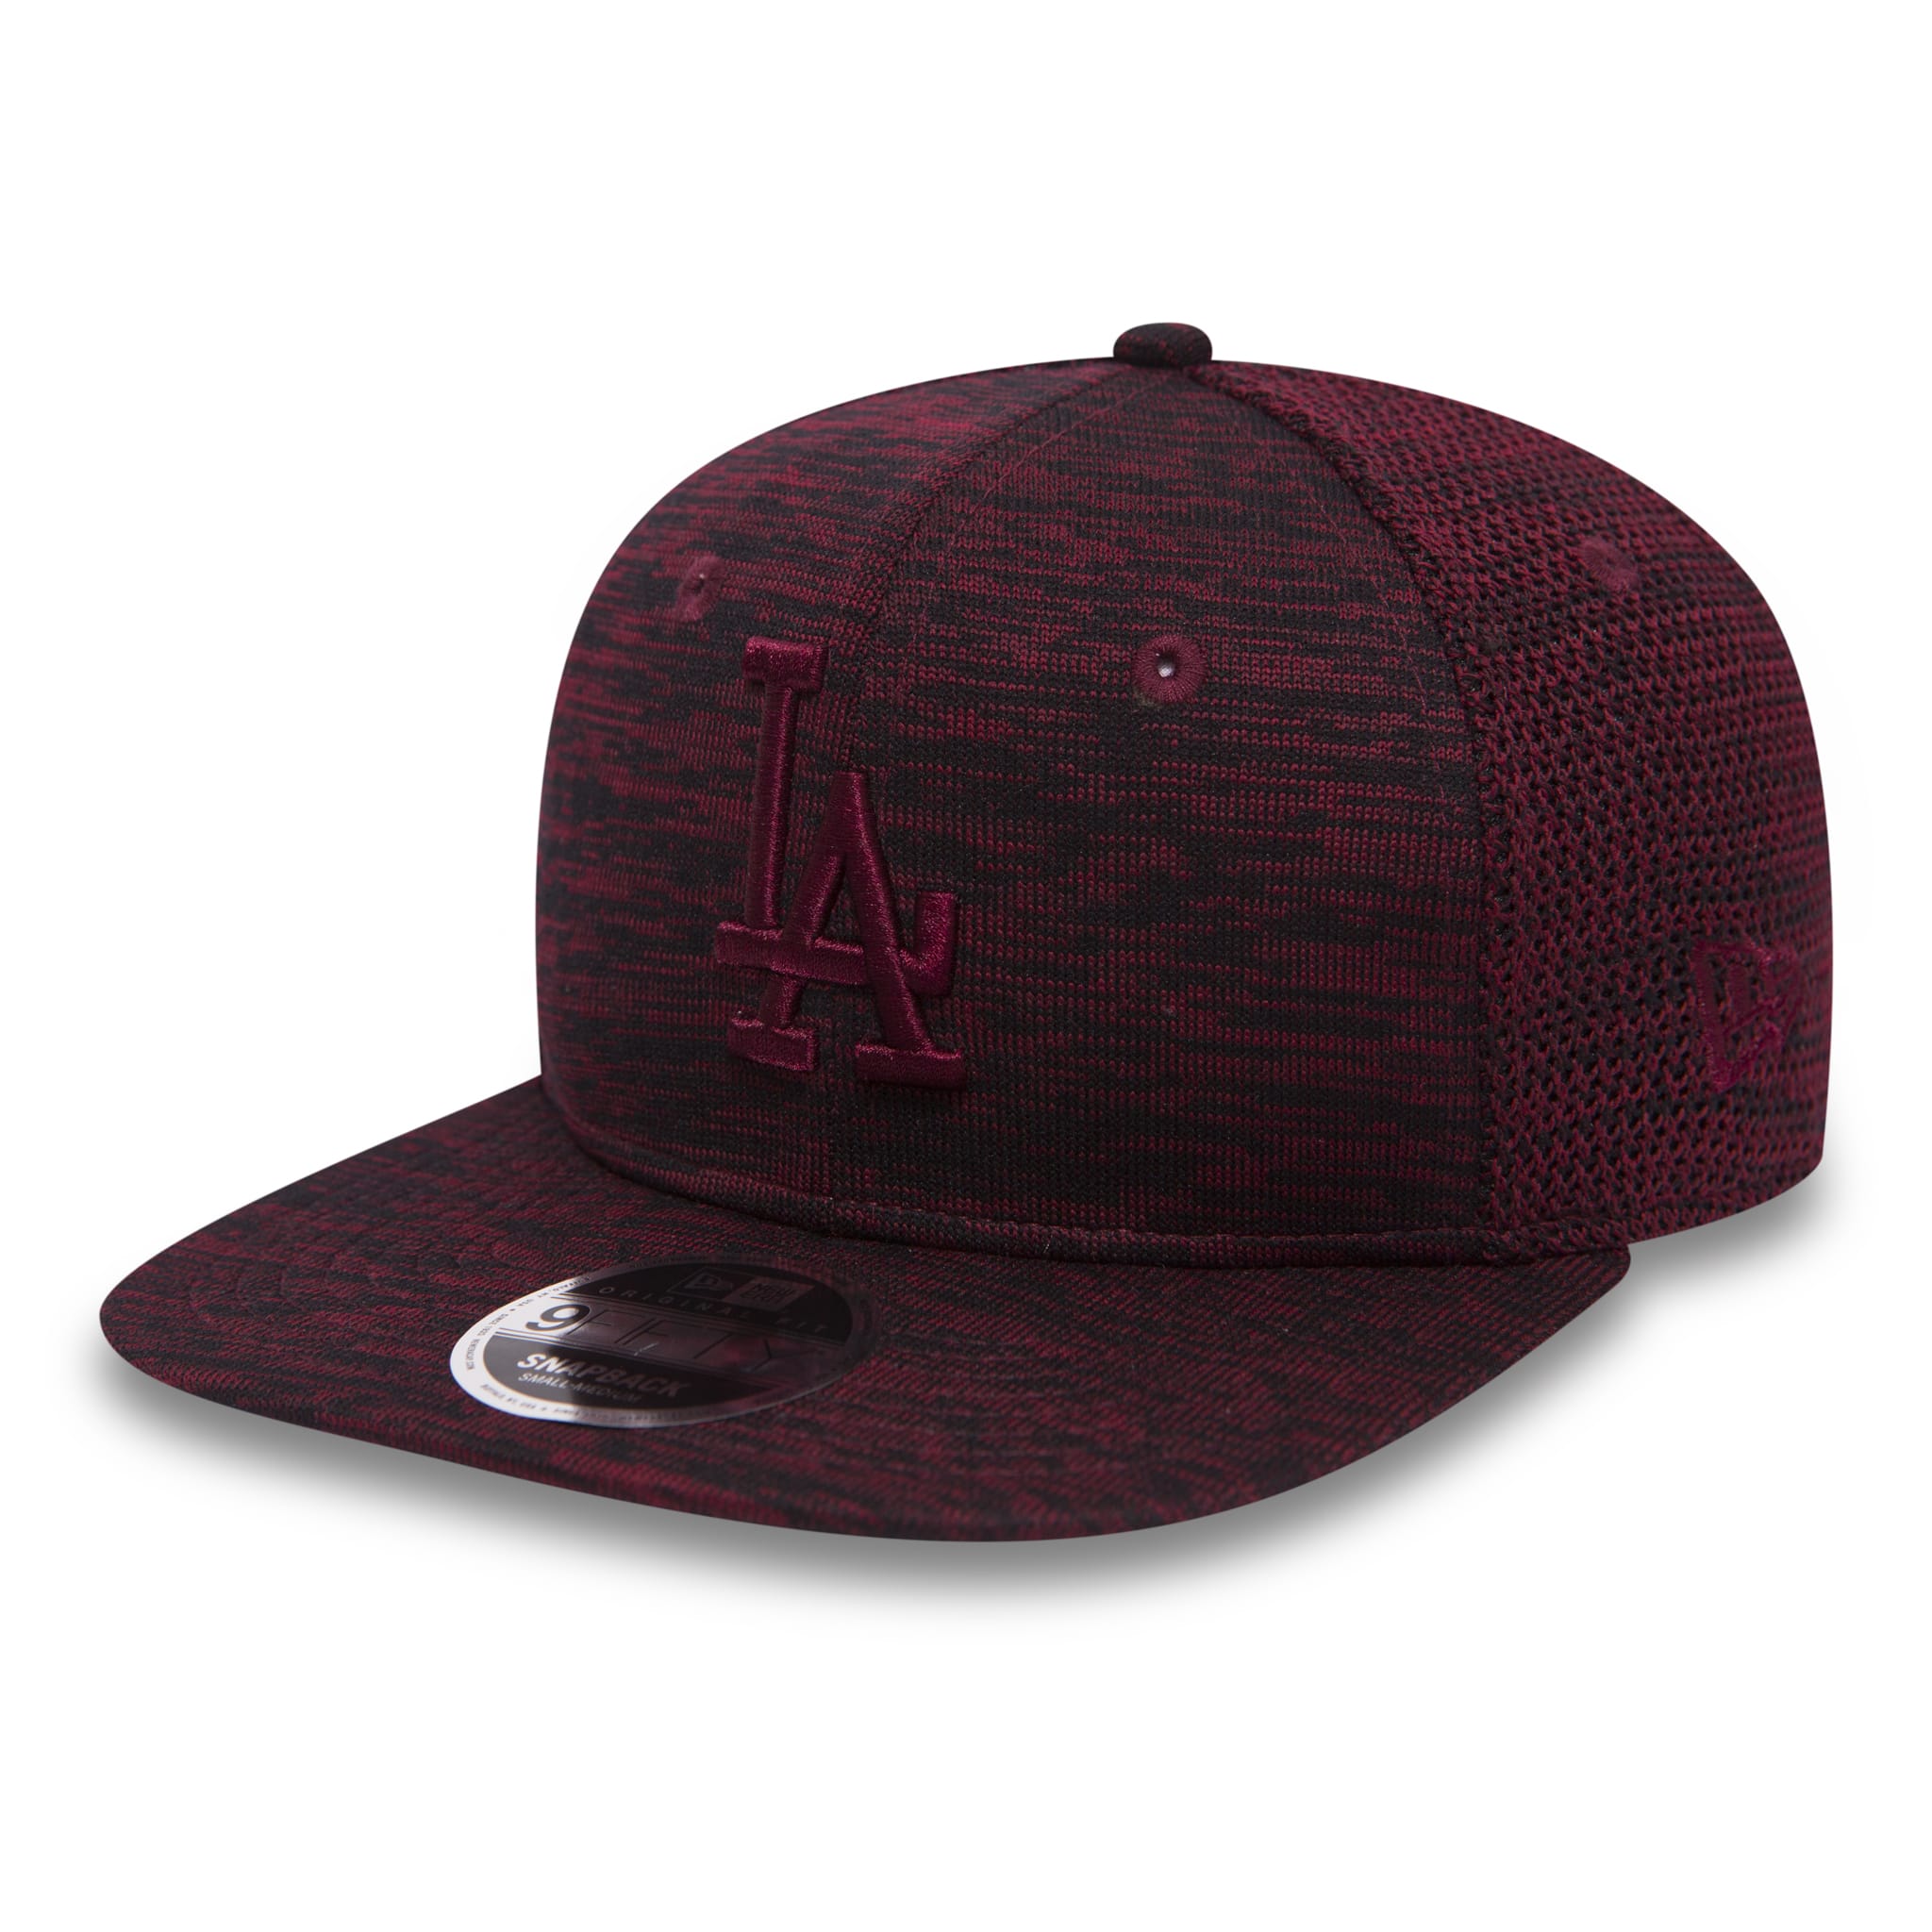 New Era Drops Sports-Luxe Inspired Engineered Fit Collection with ...